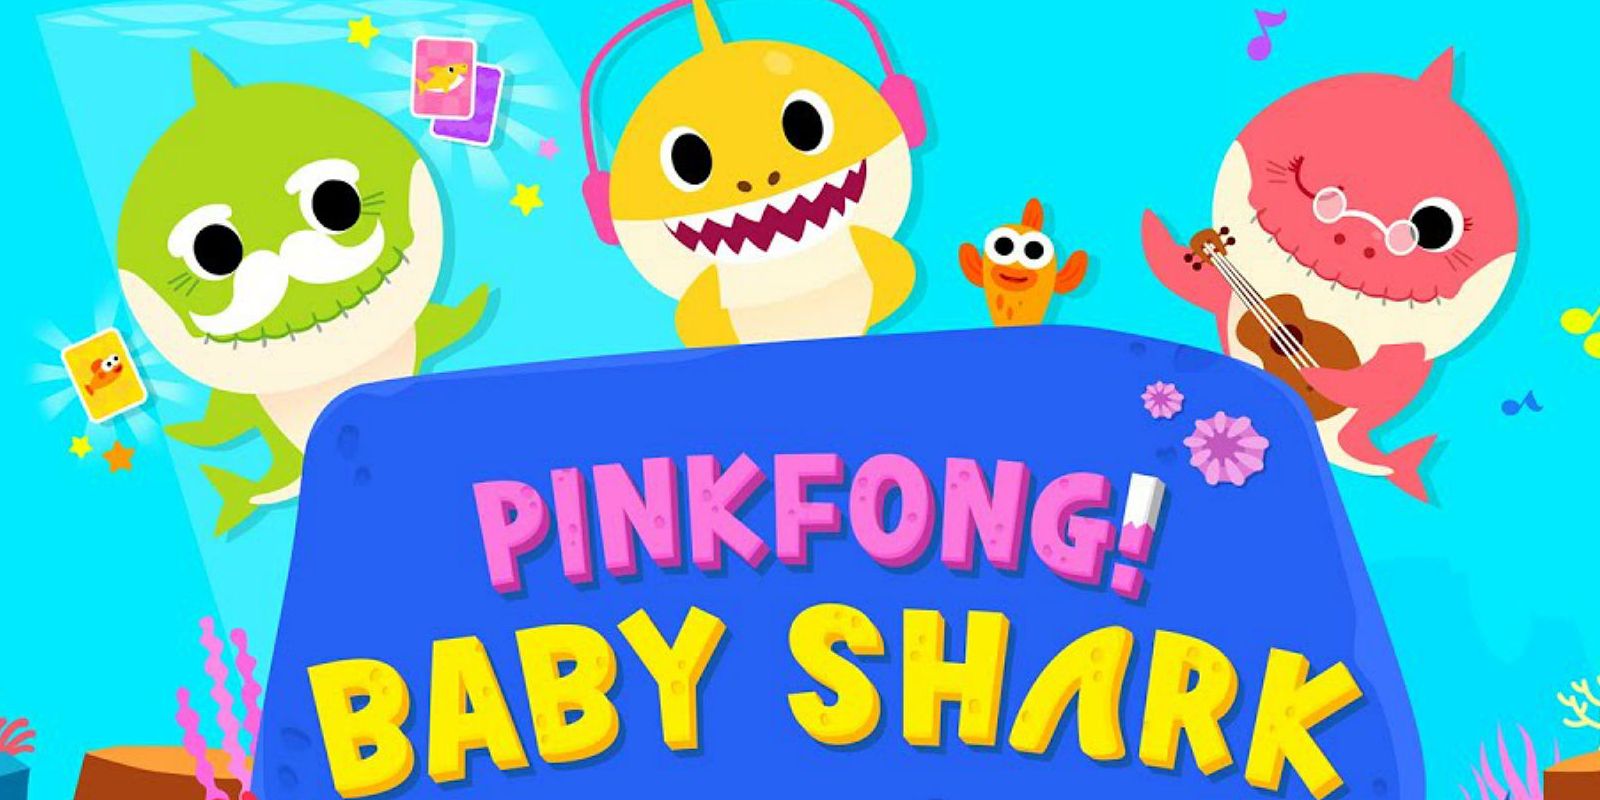 Baby Shark Is YouTube's Most-Watched Video Ever | CBR